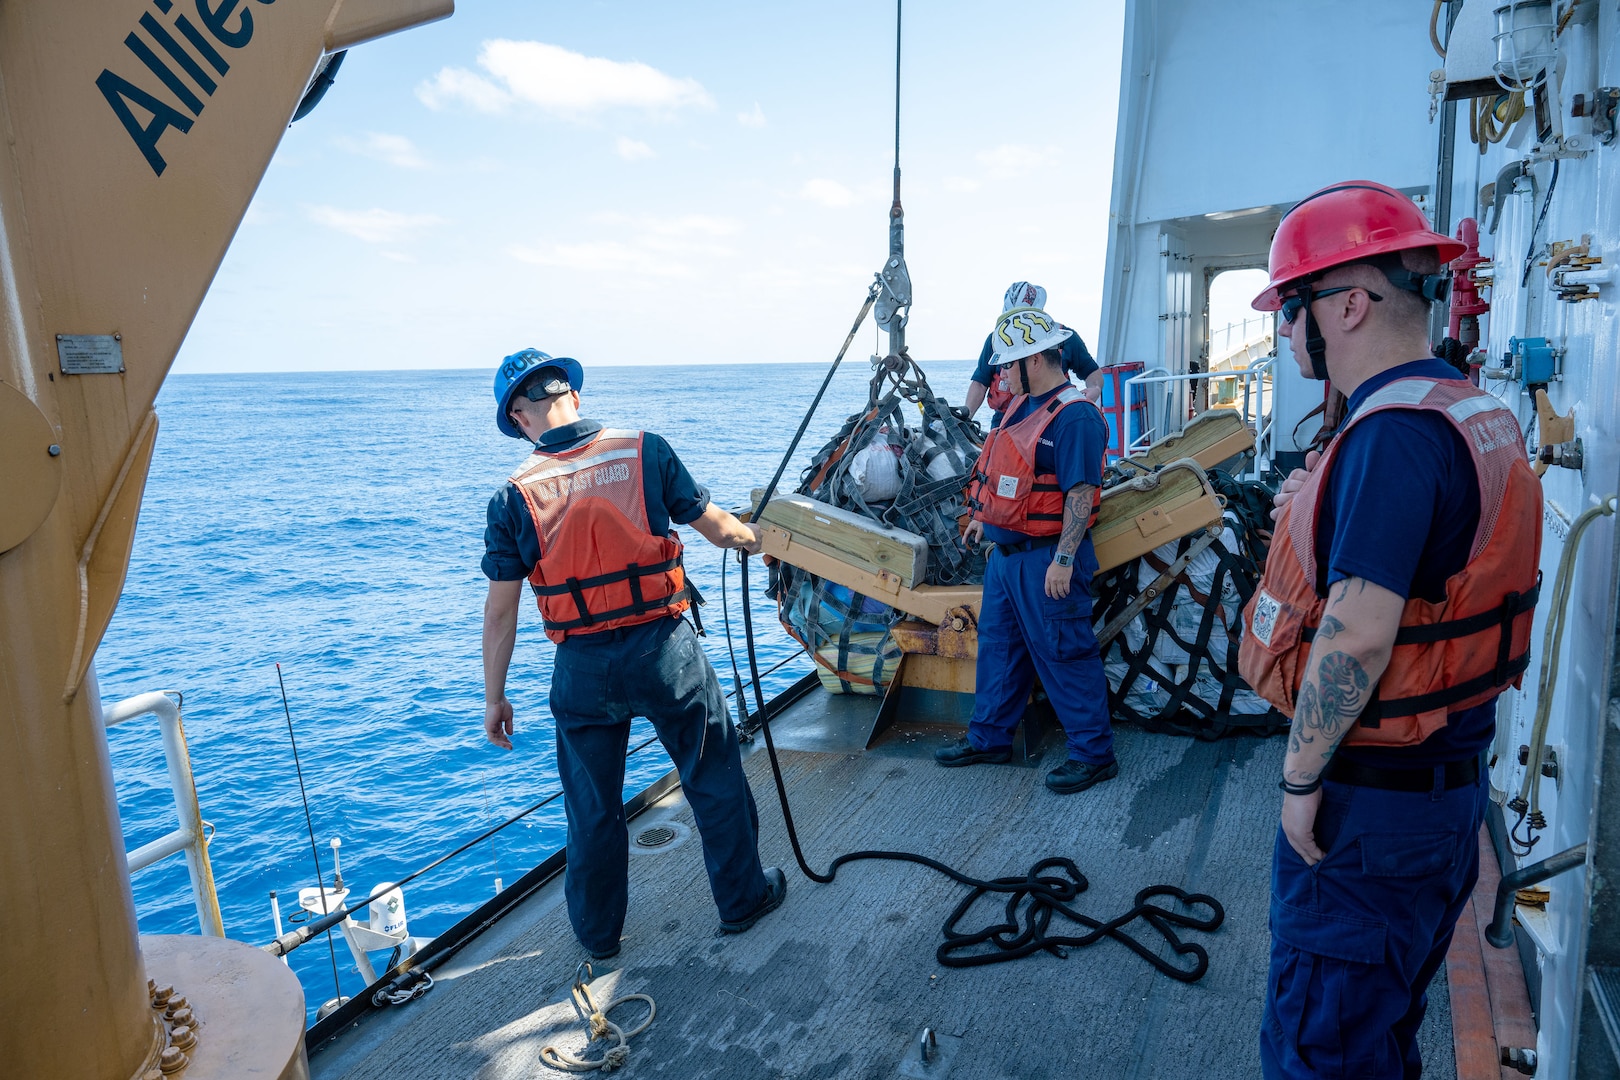 Deck crew from the U.S. Coast Guard Cutter Active (WMEC 618) prepares to transfer bales of marijuana by davit crane to the U.S. Coast Guard Cutter Waesche (WMSL 751) in the Eastern Pacific Ocean, March 25, 2023. Active and crew detected and seized over 100 bales of marijuana in international waters.    (U.S. Coast Guard photo by Petty Officer 2nd Class Justin Upshaw).